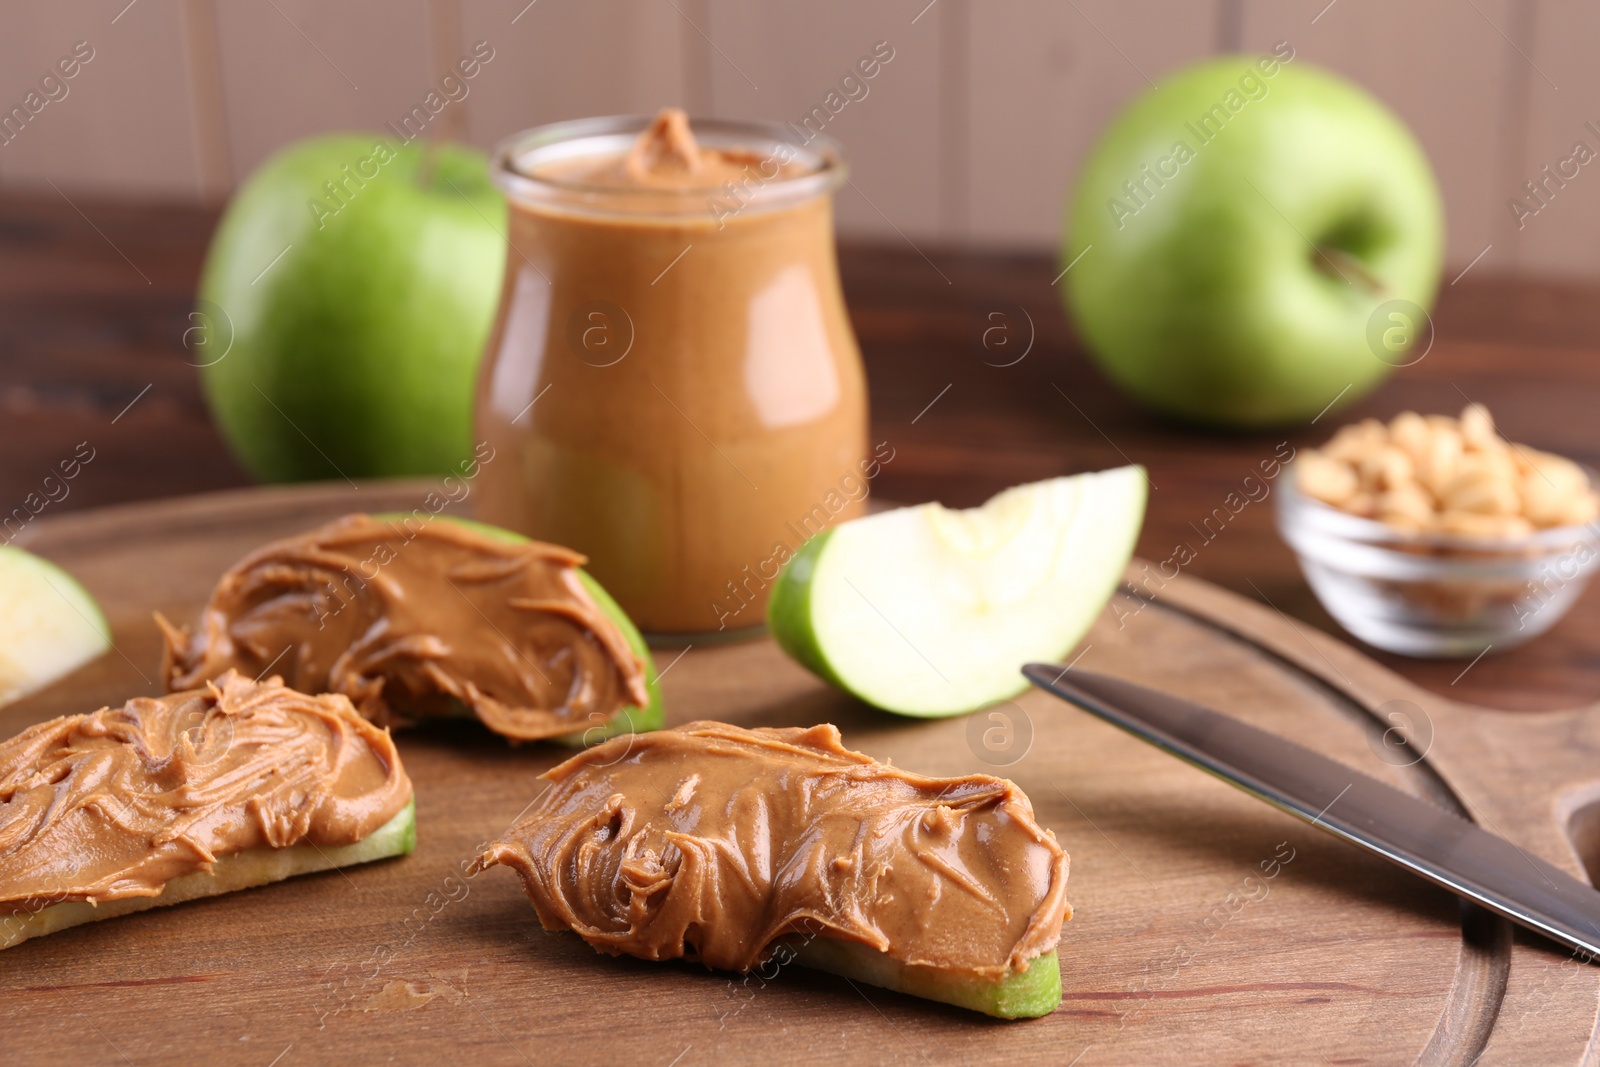 Photo of Slices of fresh green apple with peanut butter on wooden board, closeup